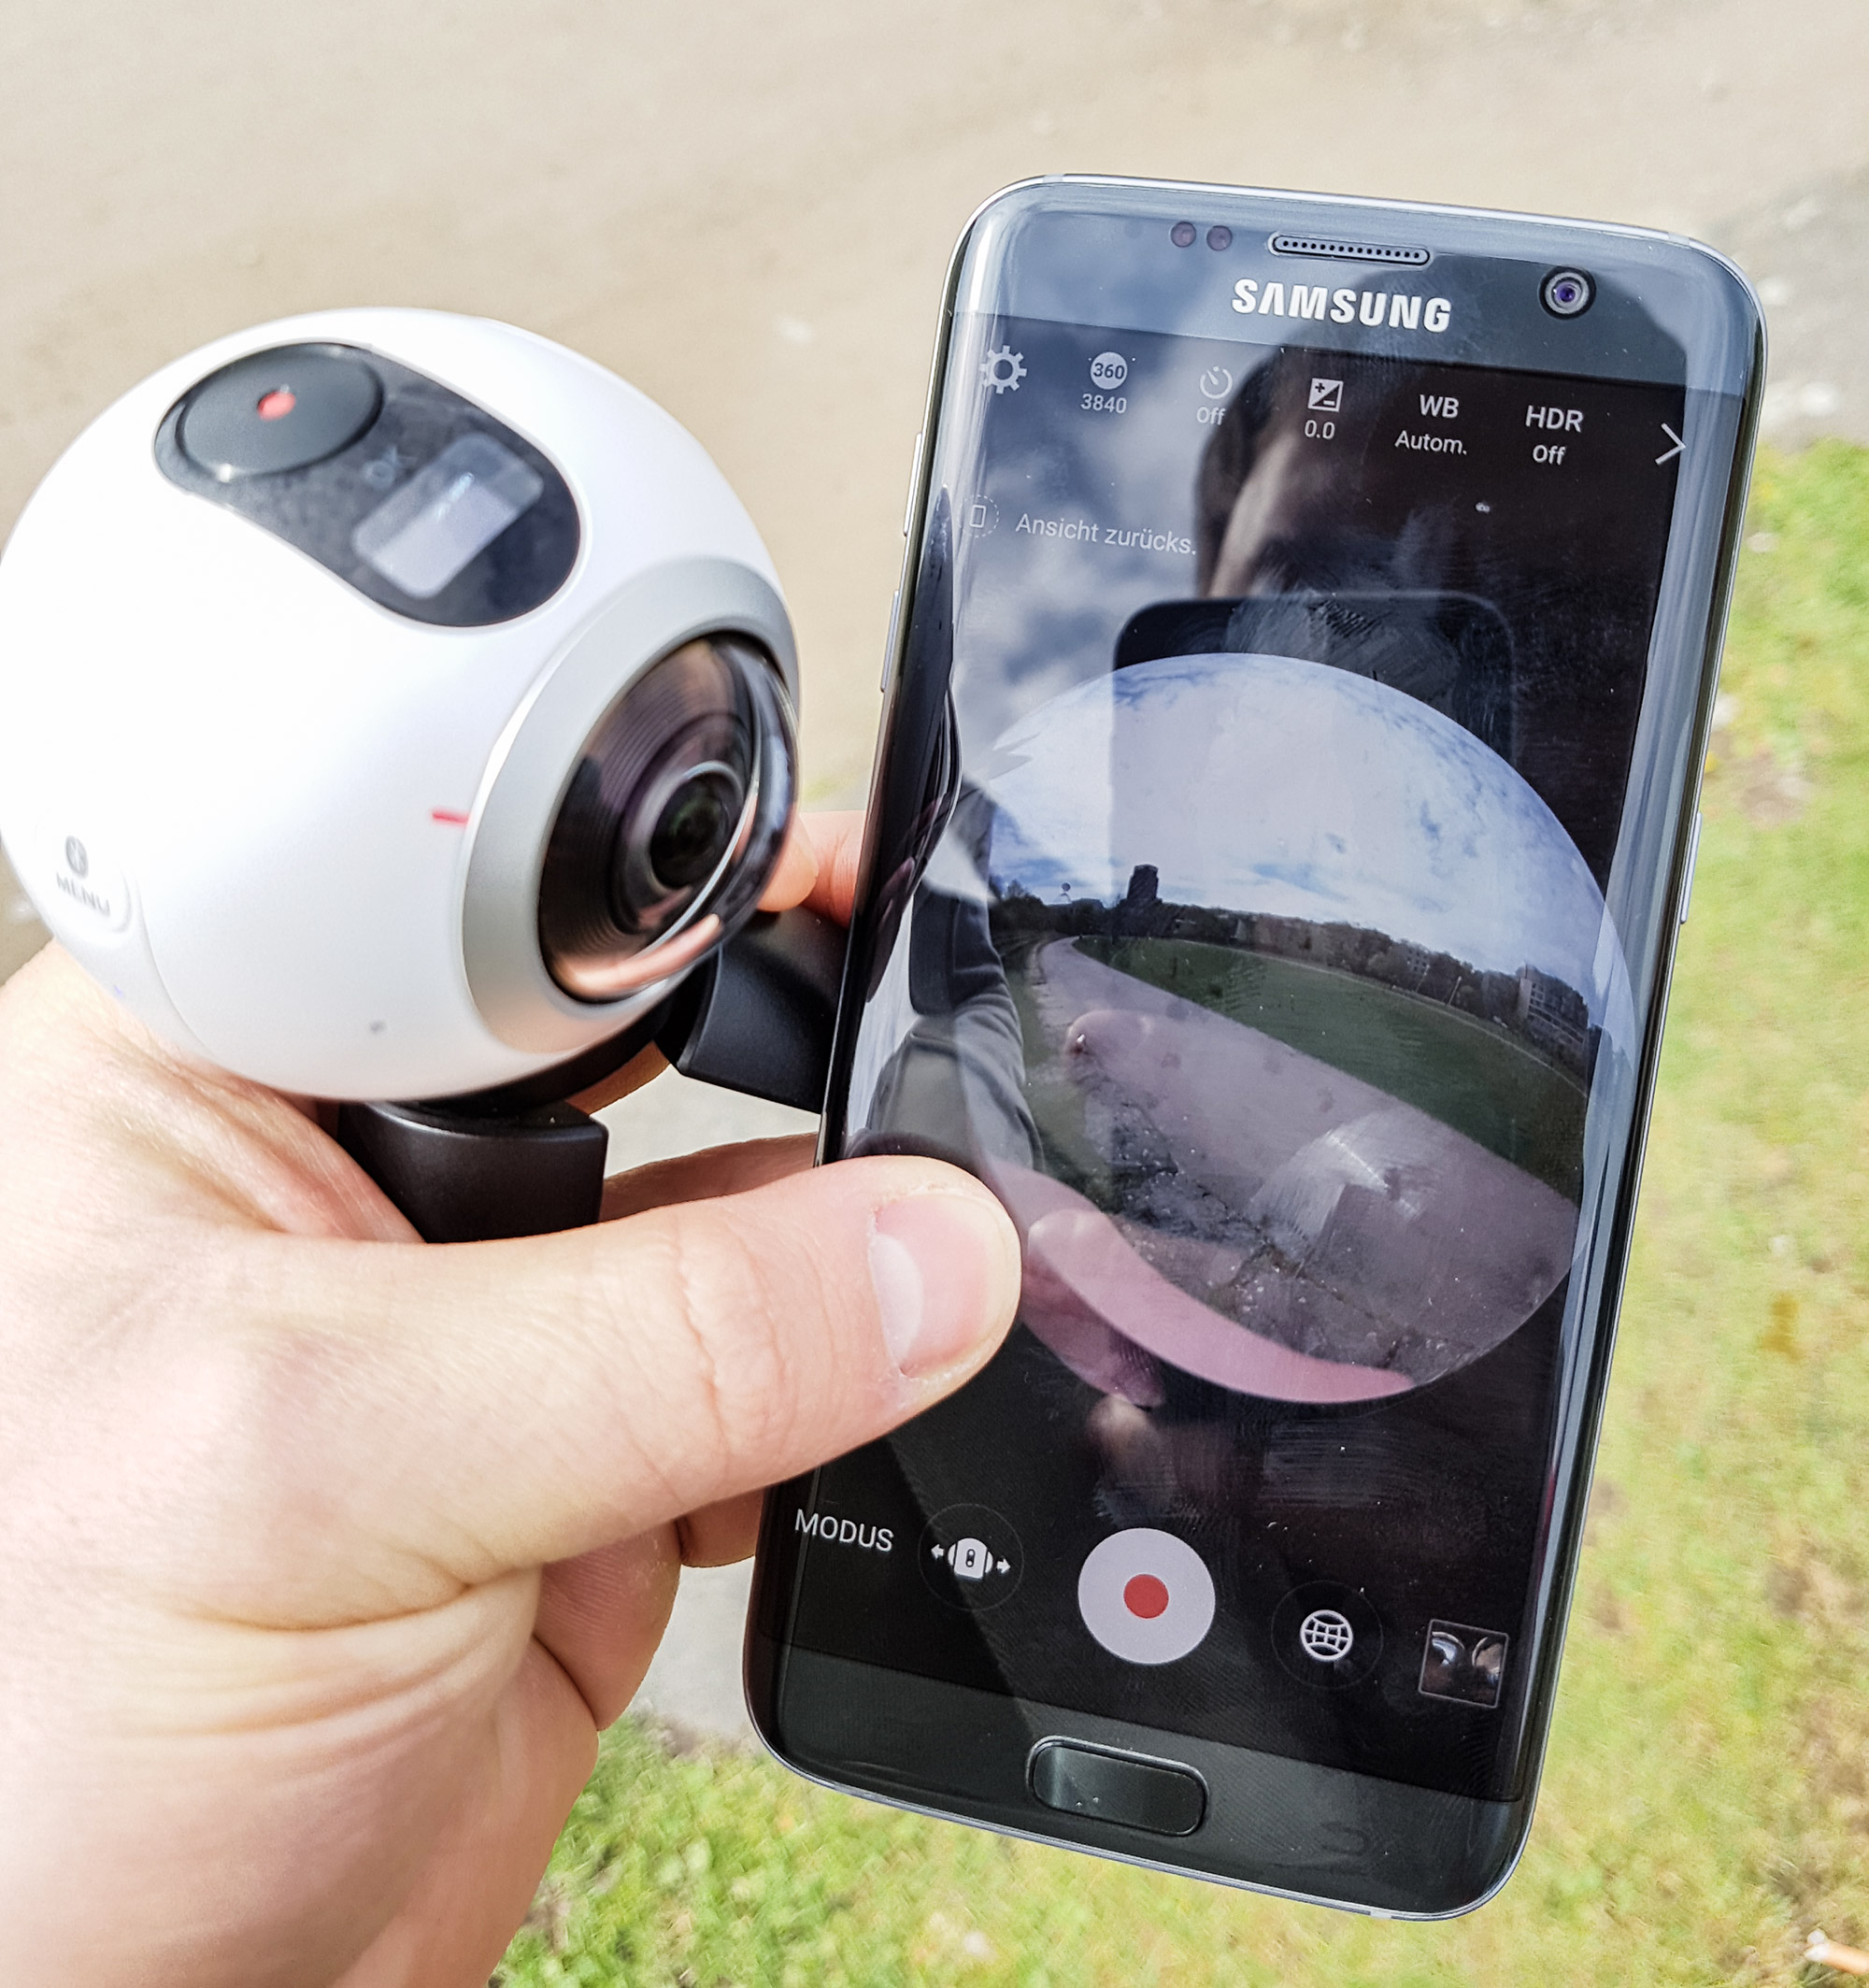 samsung gear 360 app for android